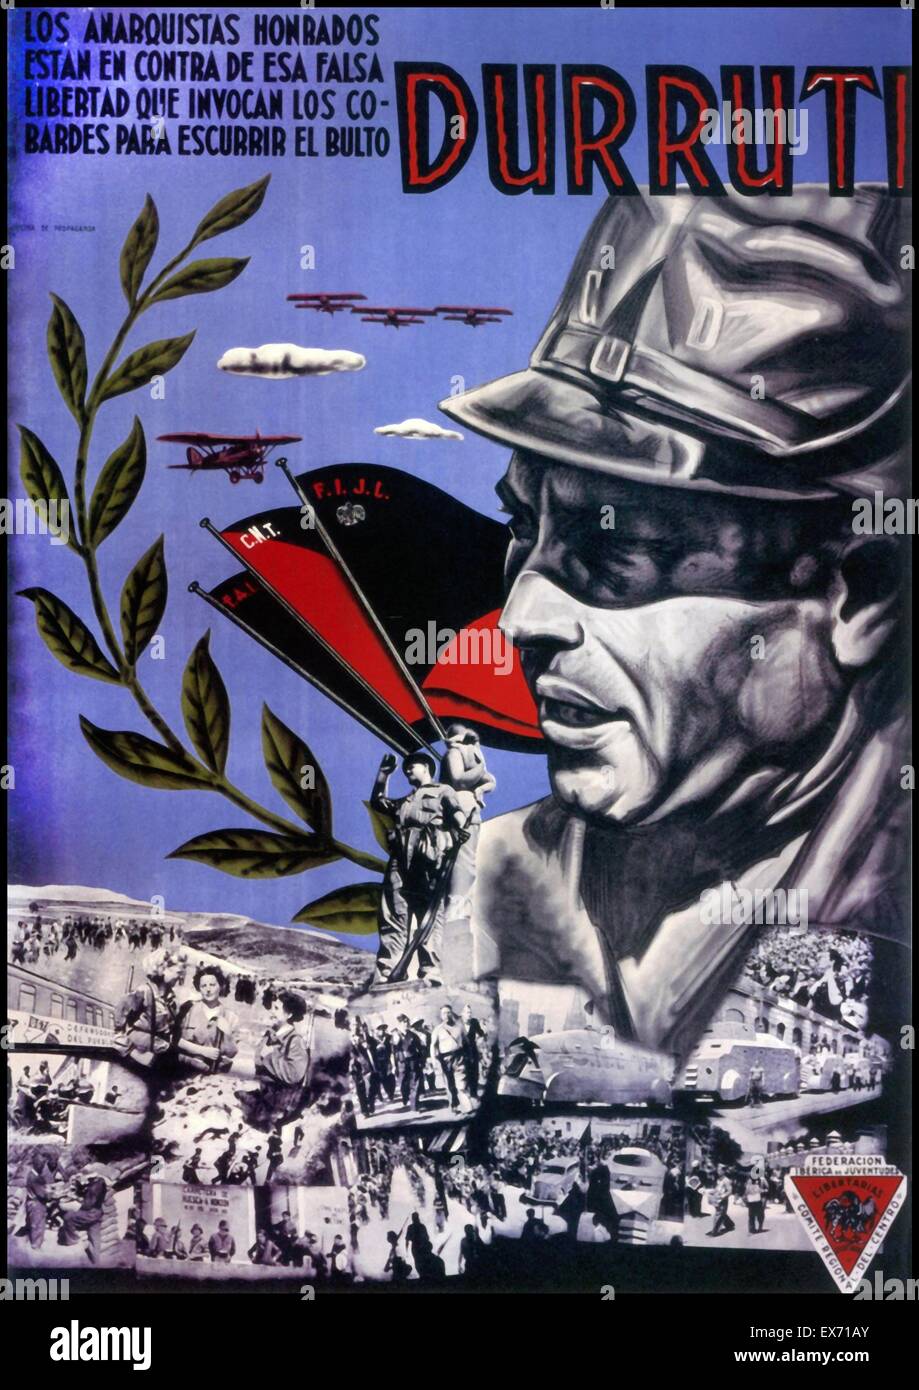 Spain! True Anarchists are against false liberty, invoked by cowards, to avoid their duty. Publication by the Spanish Anarchist movement with a portrait of José Buenaventura Durruti (1896 – 20 November 1936). Durruti was an Anarcho-syndicalist militant in Stock Photo